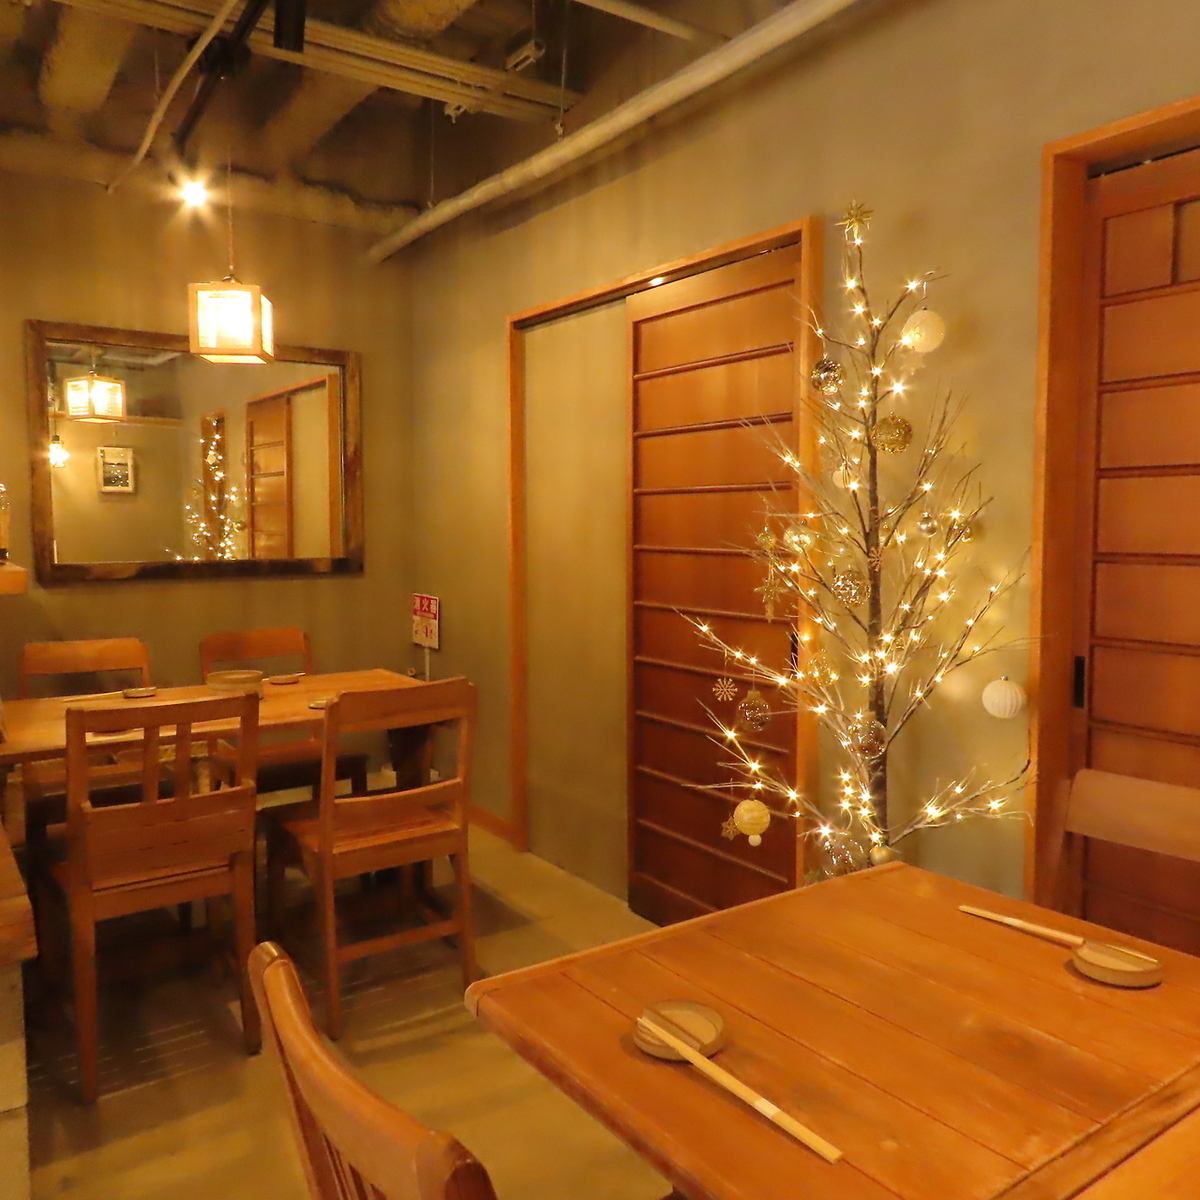 You can enjoy a variety of drinks and food in a wonderful space ♪